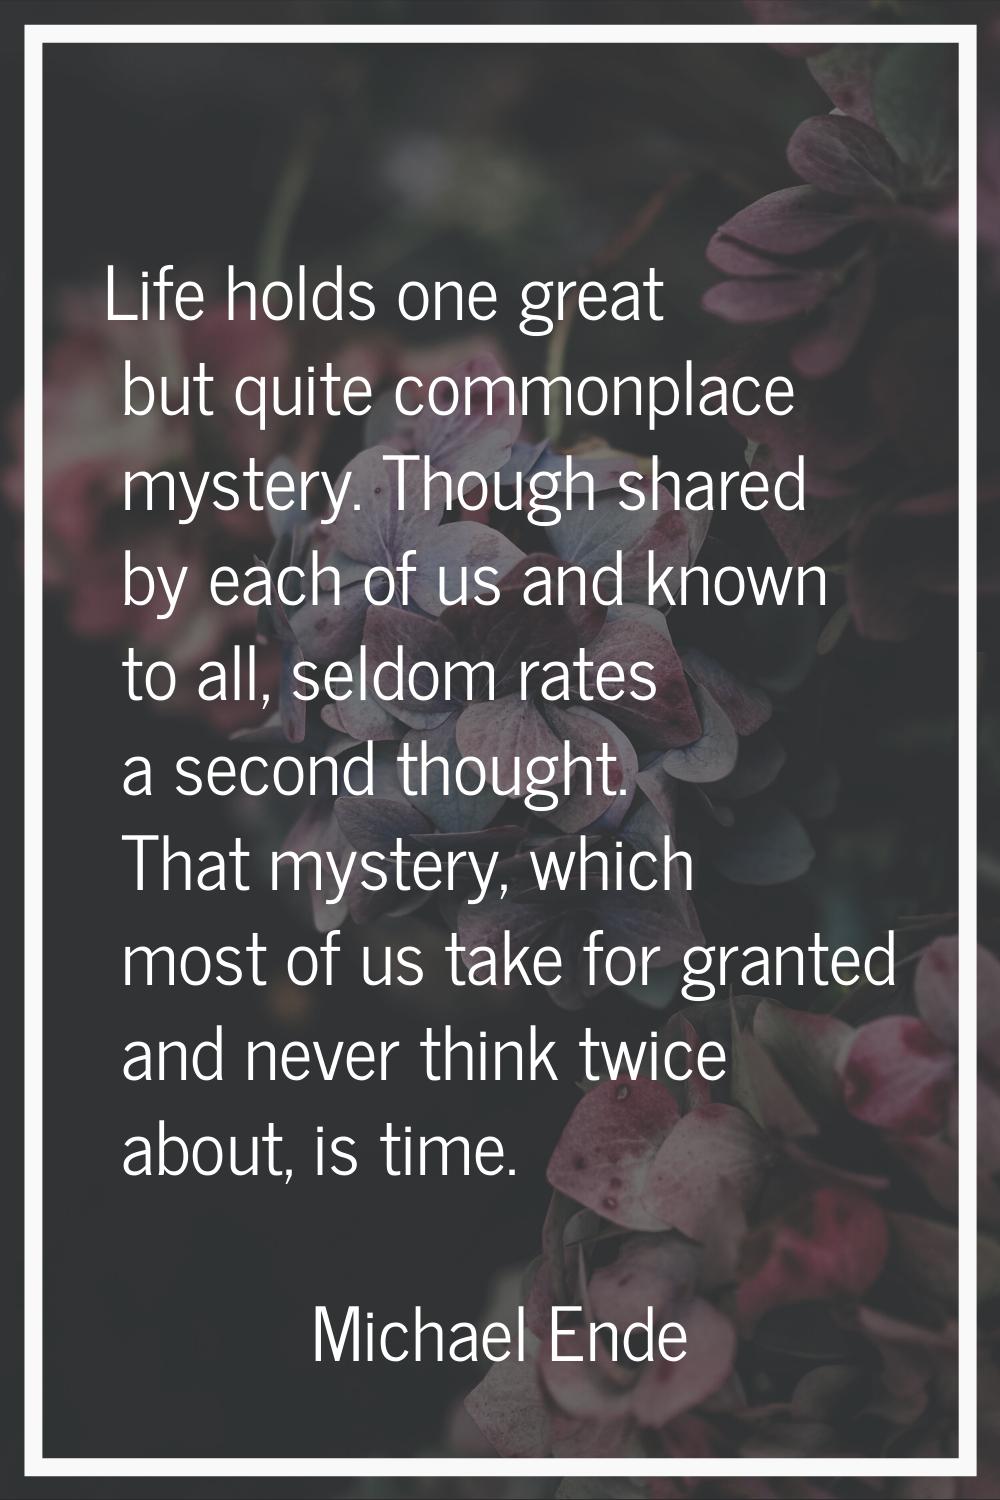 Life holds one great but quite commonplace mystery. Though shared by each of us and known to all, s